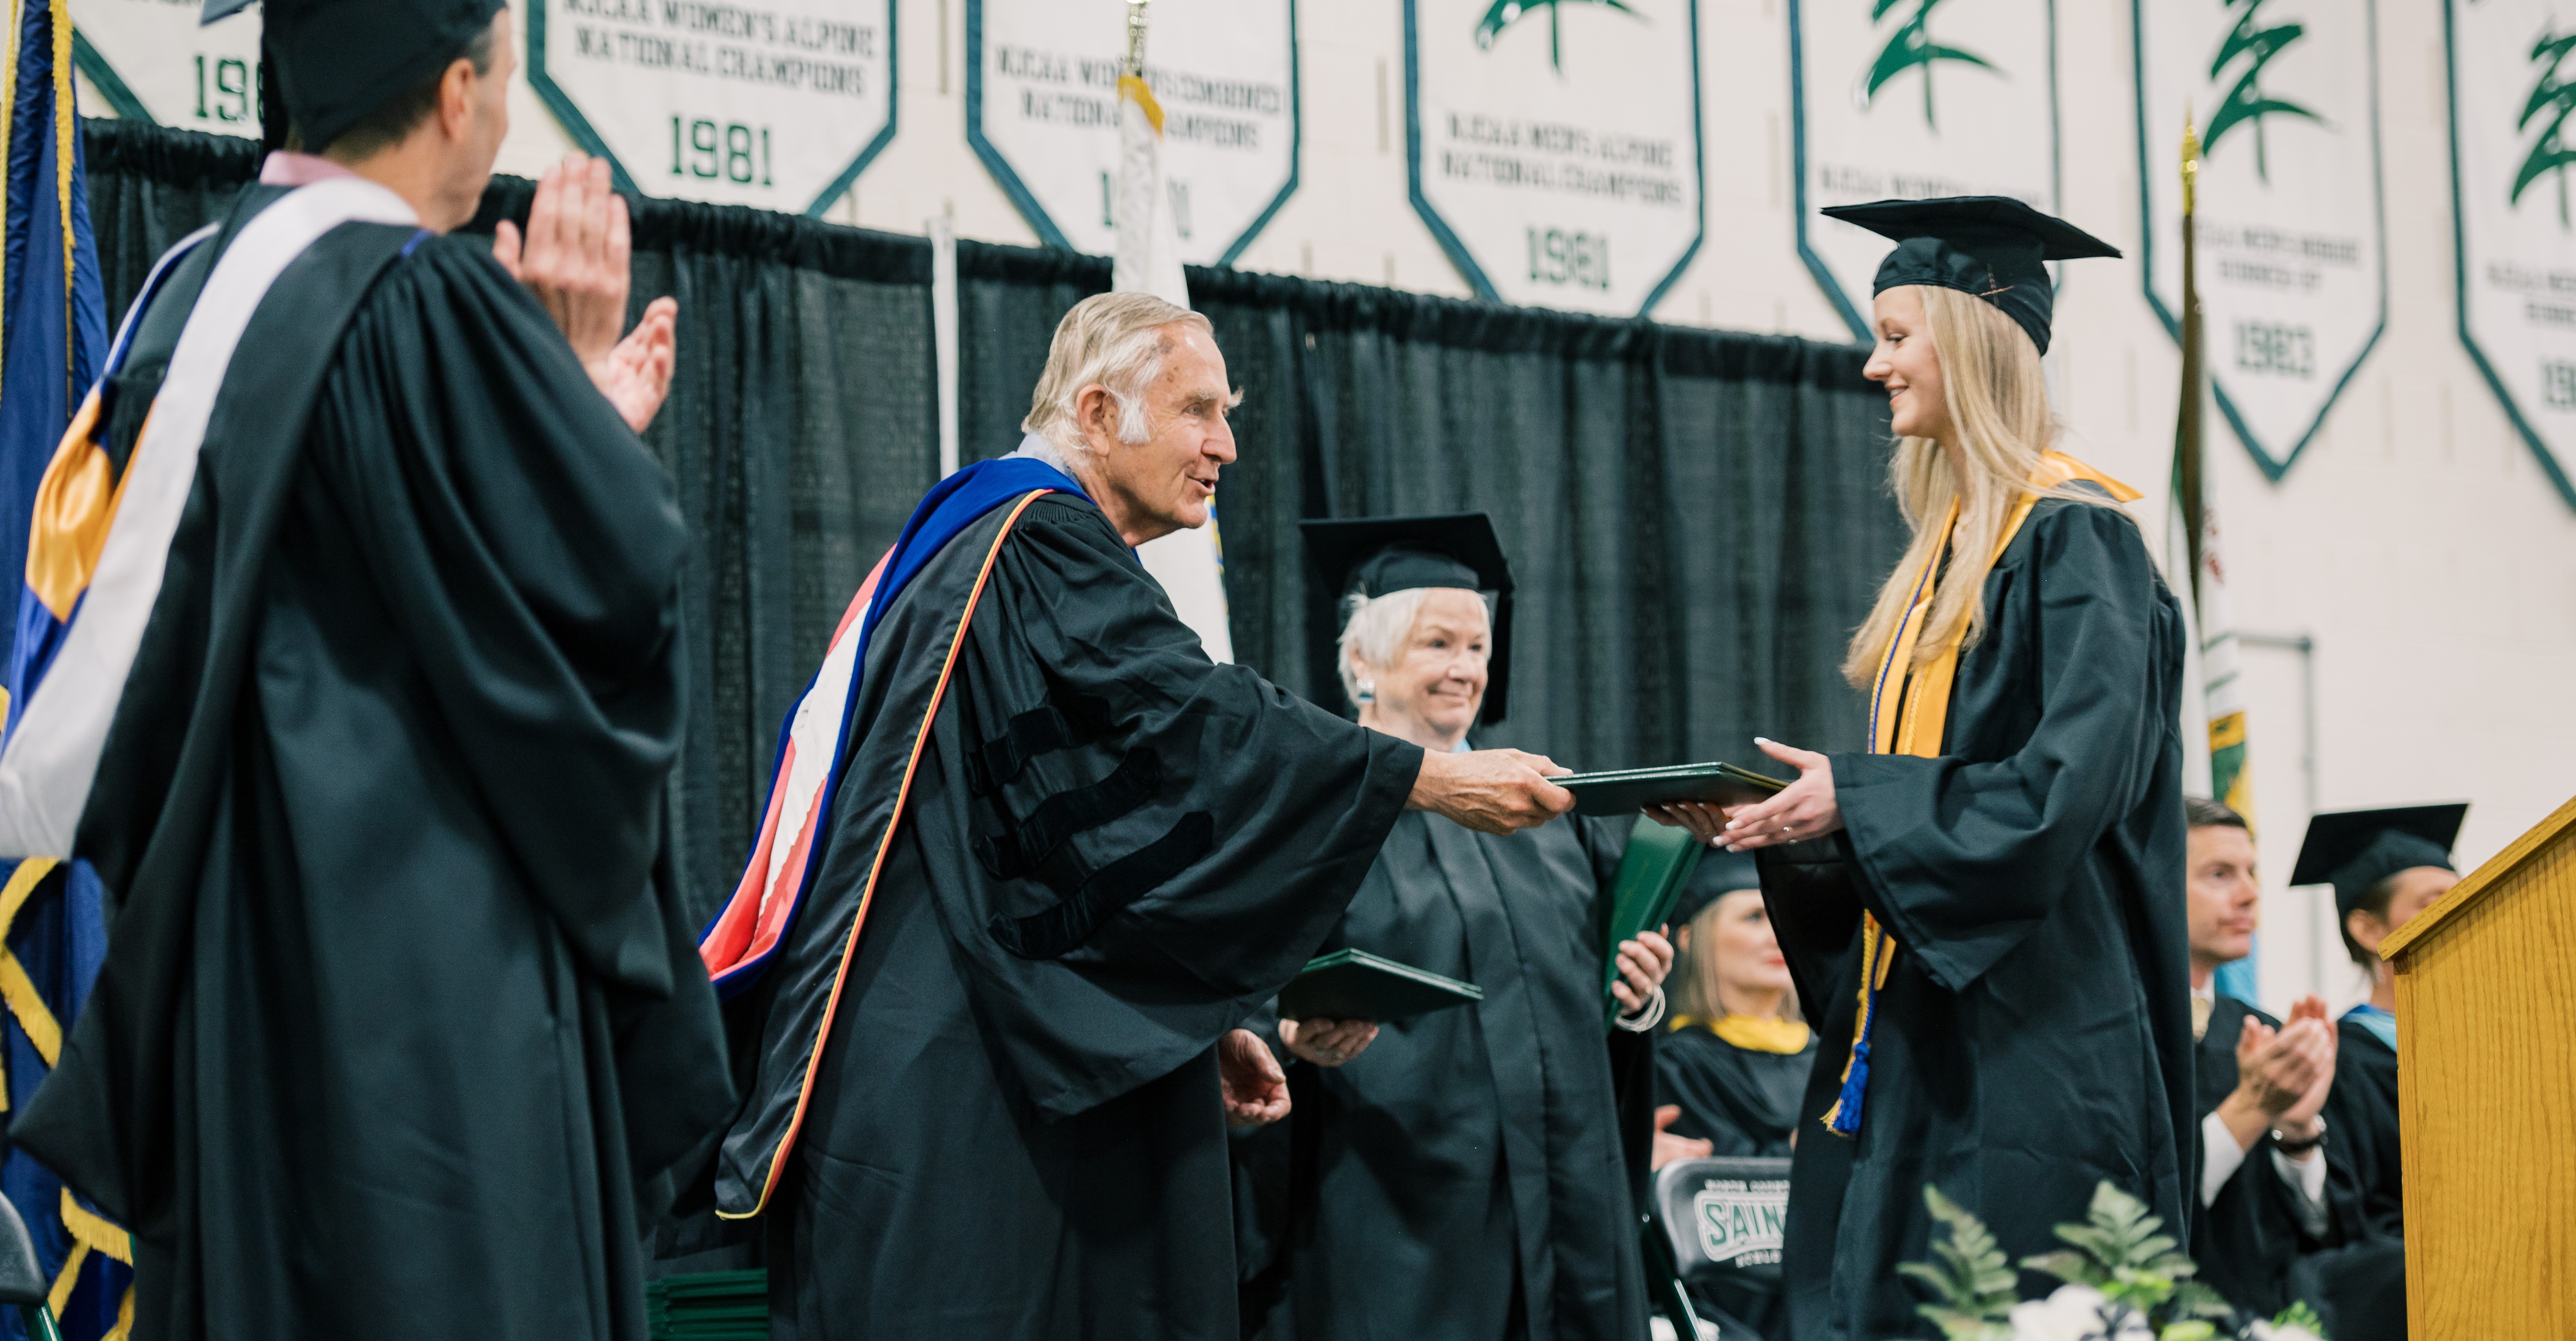 A student receives her diploma on stage during a college graduation ceremony